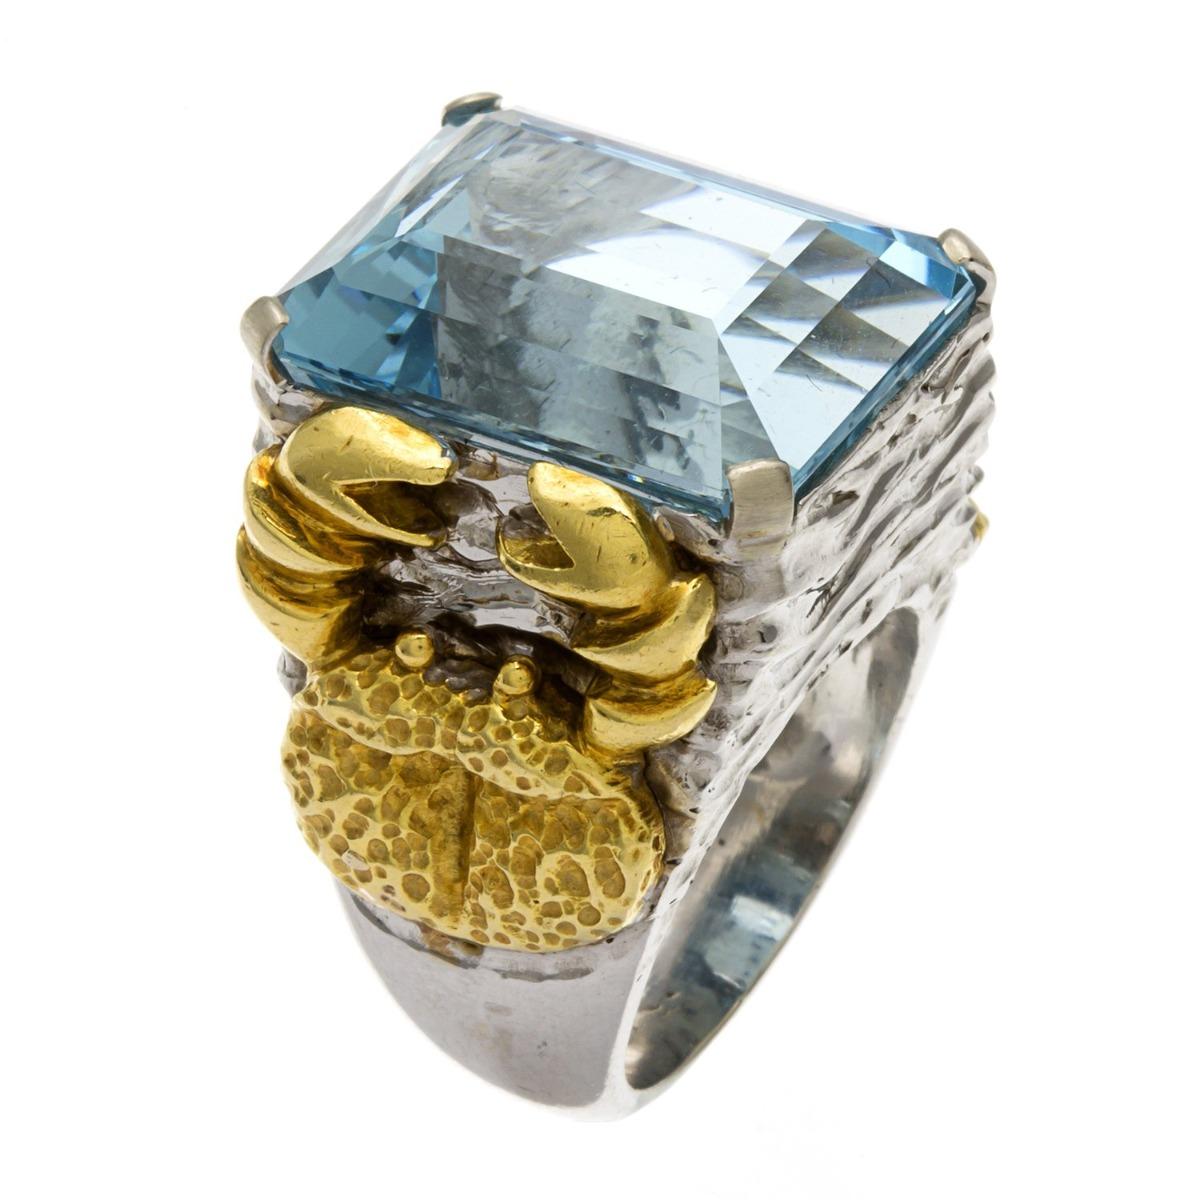 Metal: 18 K Two-Tone Gold 
Finger Size: 7
Gram Weight: 32.3 Gms
Diamond Carat Weight: N/A
Diamond color: N/A
Diamond Clarity: N/A
Diamond Cut: N/A
Gemstone: Aquamarine
Gemstone Weight: 25 CT
Gemstone Cut: Emerald
Gemstone Color: Aqua